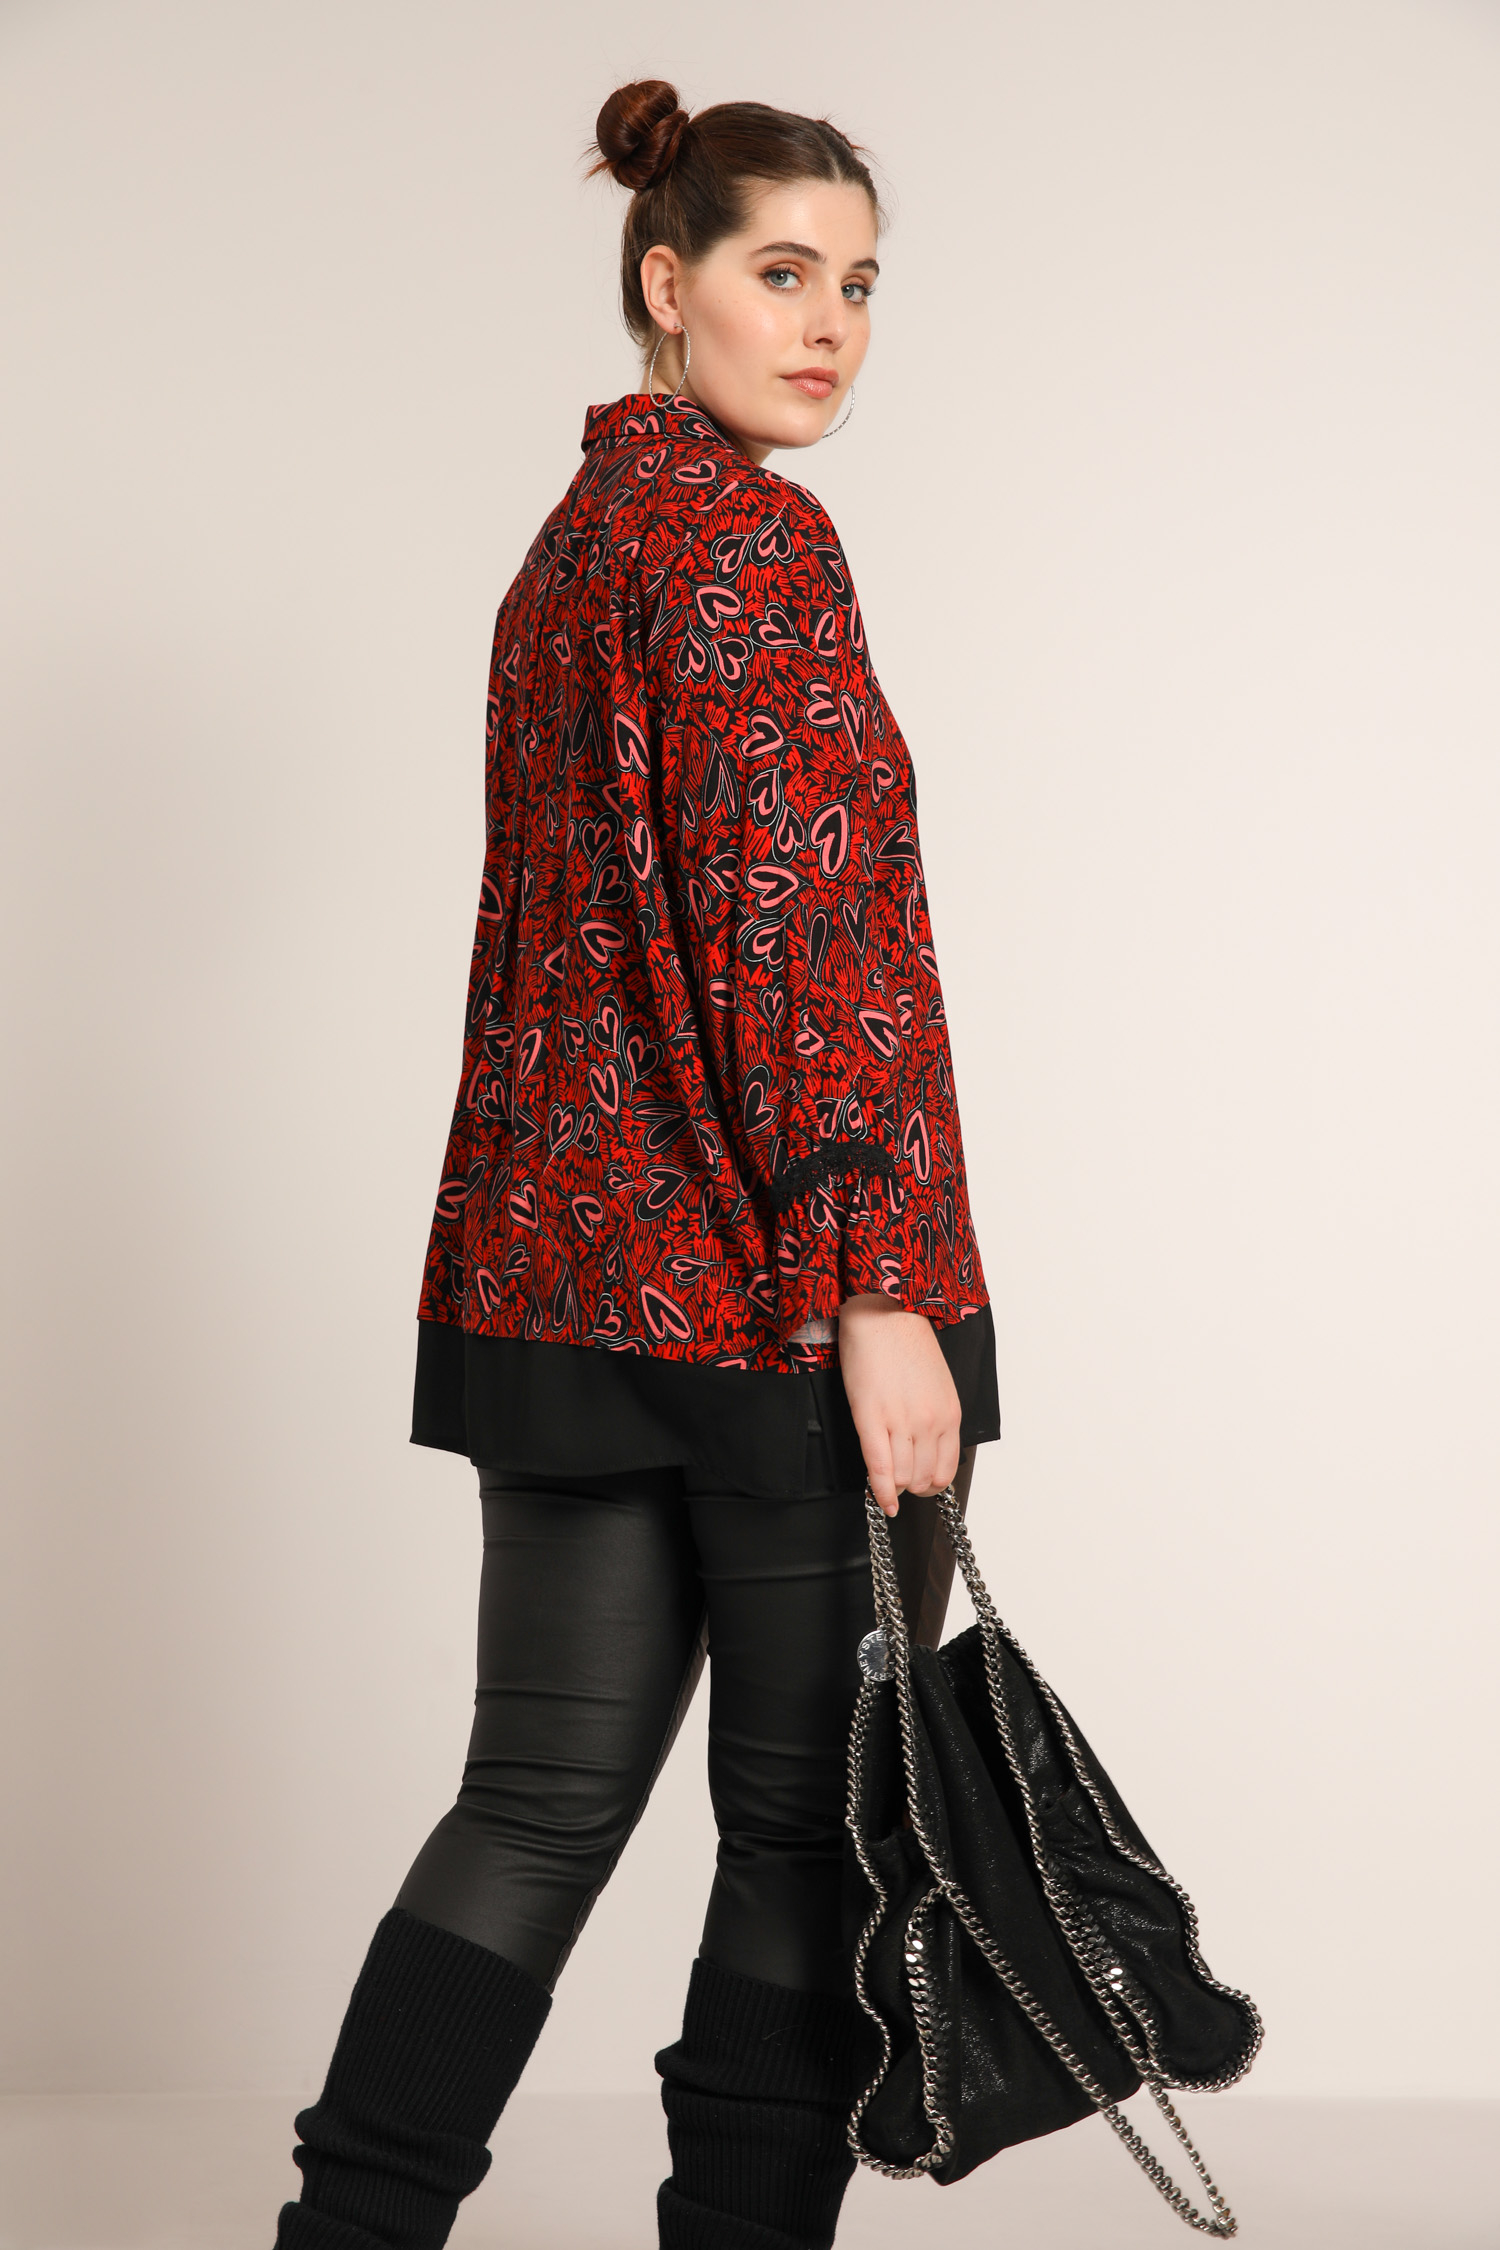 Printed blouse with zipped collar